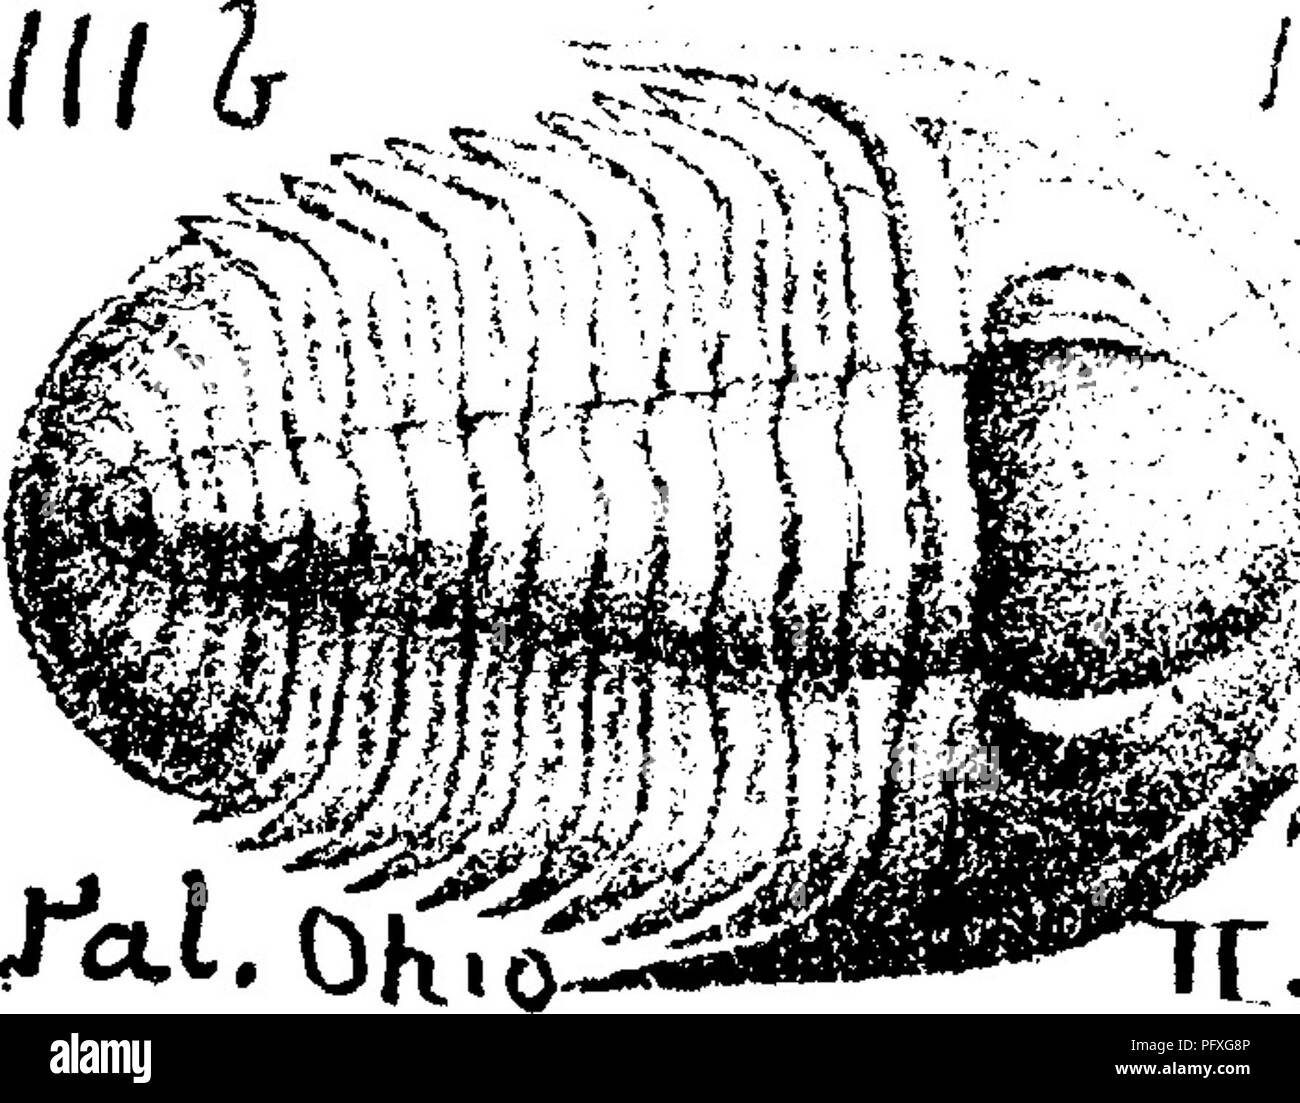 . A dictionary of the fossils of Pennsylvania and neighboring states named in the reports and catalogues of the survey ... Paleontology. Prob. 770 part of head, with glabellar furrows ; 14, entire head, some fur rows; 15, enlarged twice^ tail of small individual; 17, ditto showing internal surface and doublure ; 20, profile view of 15 plate 23, fig. 30, nearly entire trilobite; 31, tail of a very large specimen. The head is covered with low pimples (tubercles) each ring of the chest and body is covered with granules, some times as if in two rows. Whole trilobites are rarely found and their cru Stock Photo